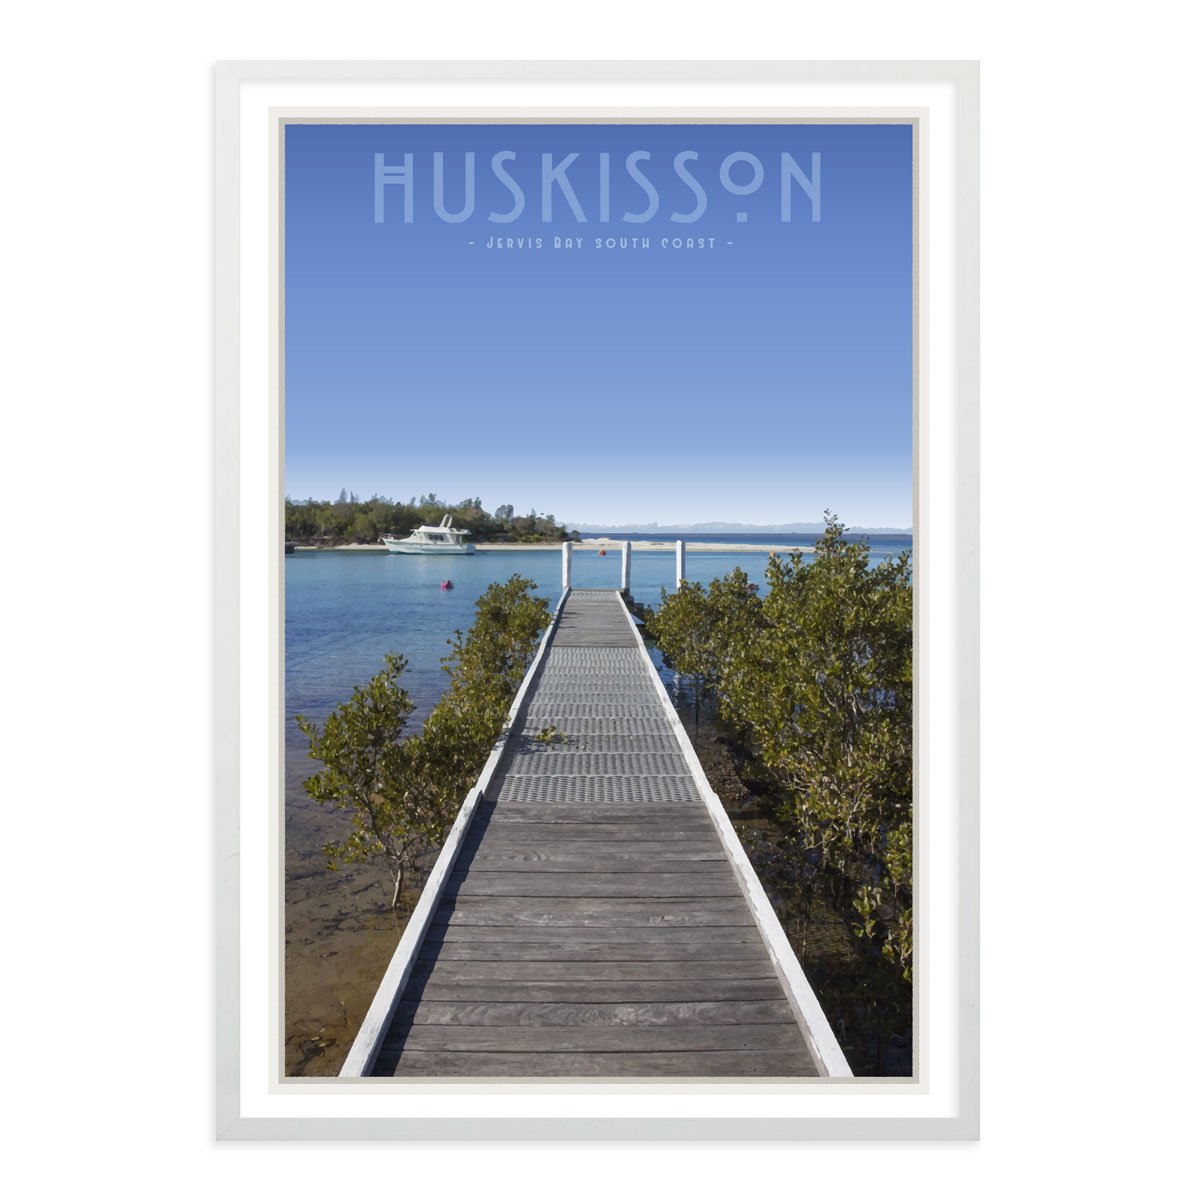 Huskisson vintage travel style framed poster by places we luv